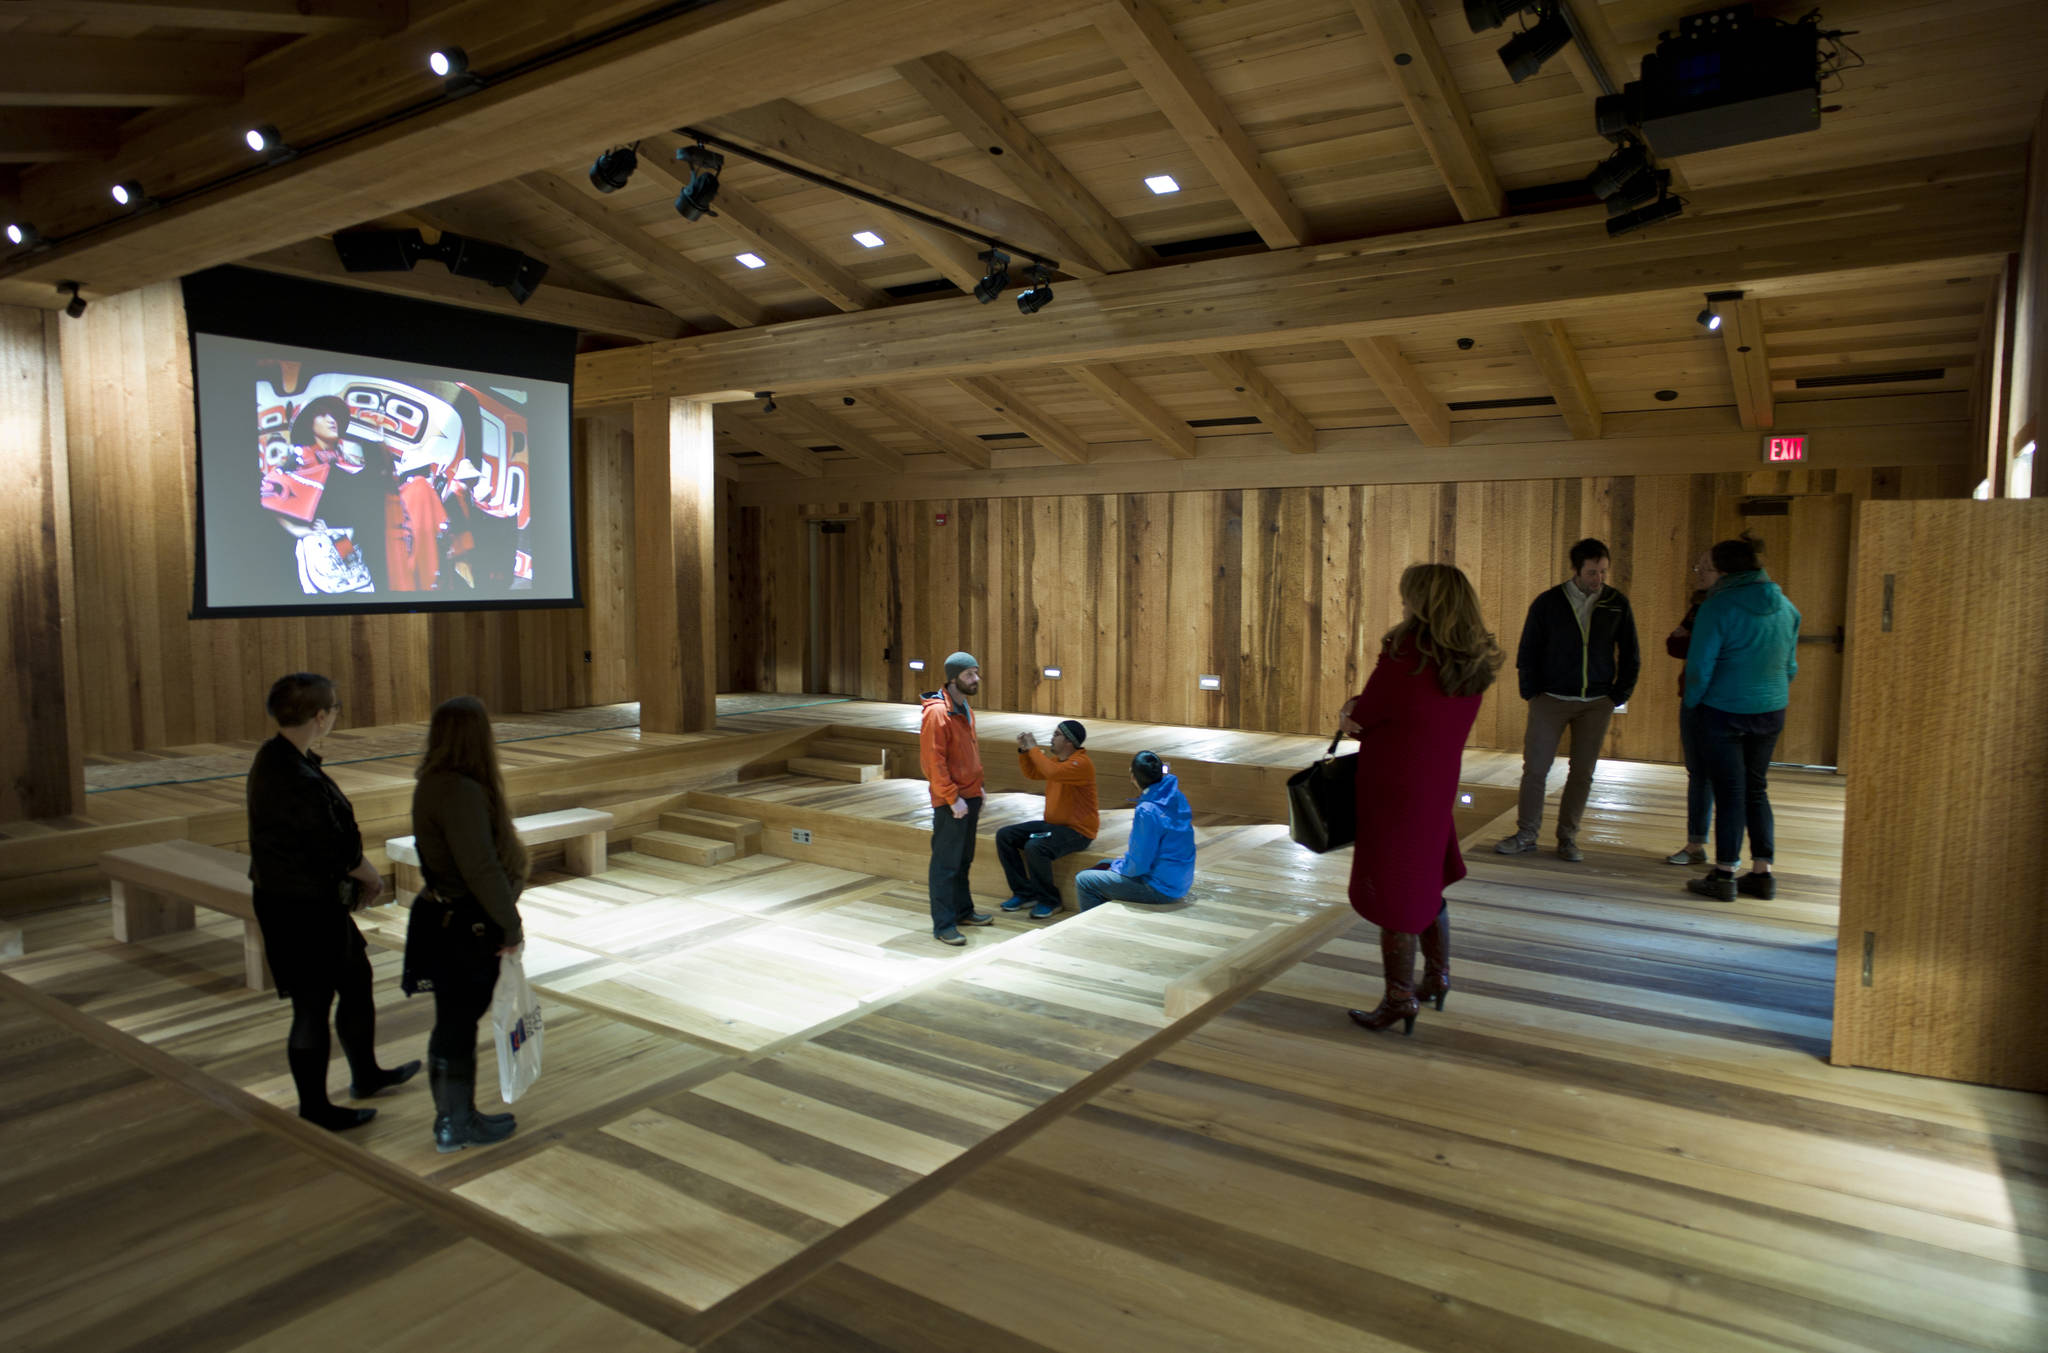 Guests view the Clan House inside the new Walter Soboleff Center and home of the Sealaska Heritage Institute during a Sneak Peak event held on Thursday. (Michael Penn | Juneau Empire File)